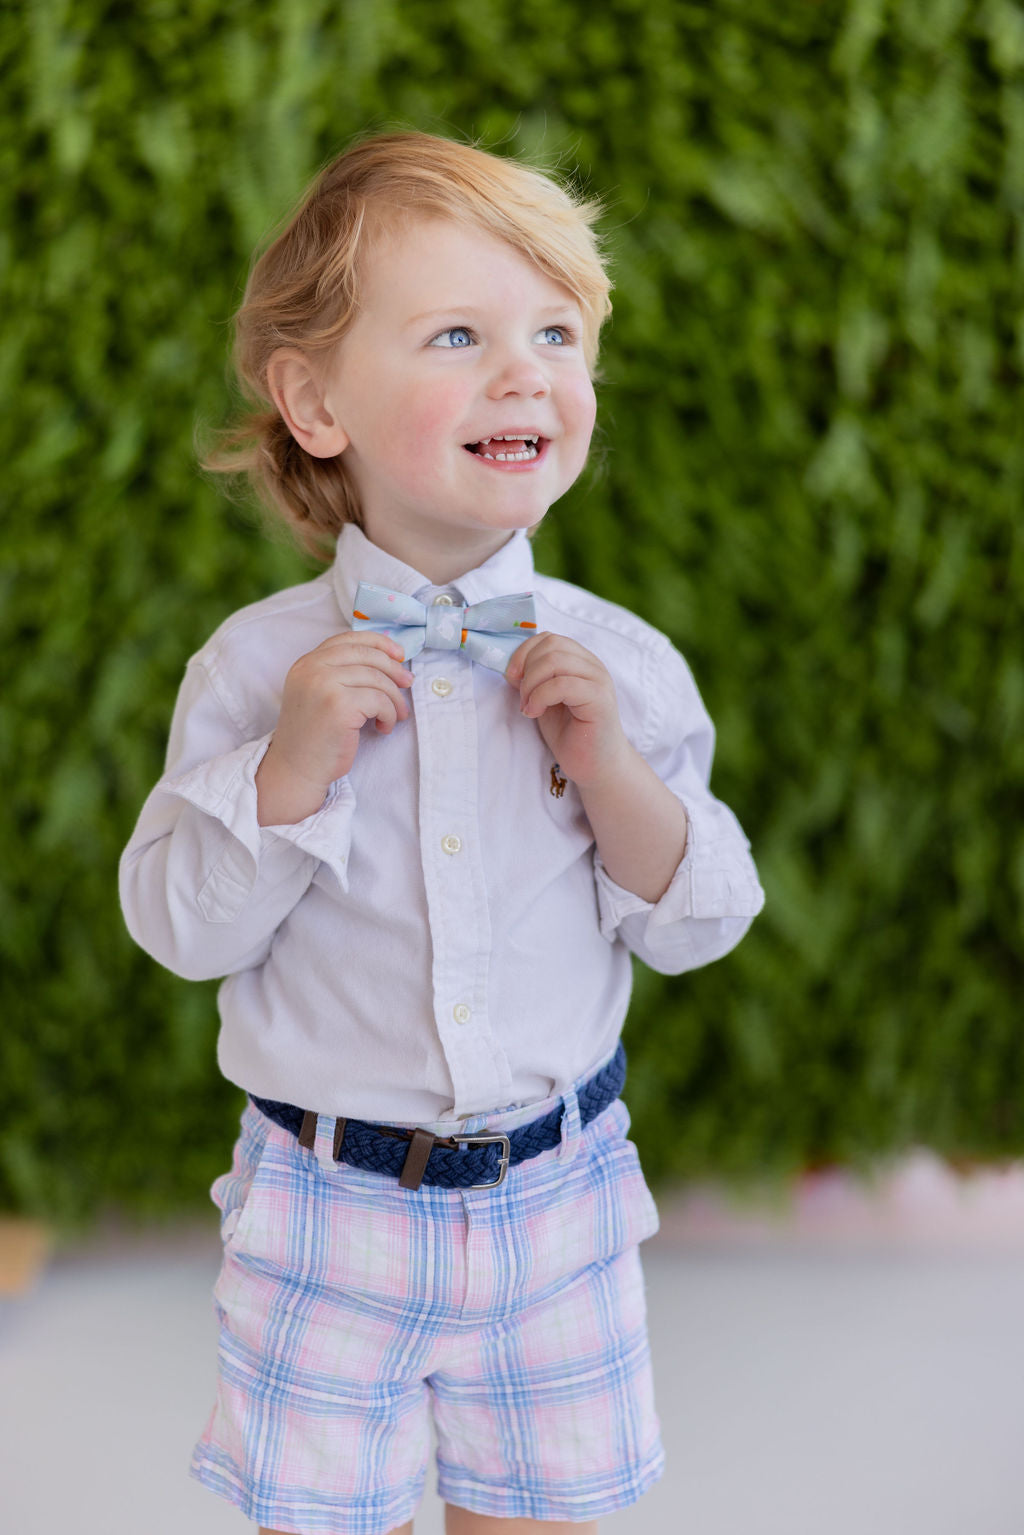 Small Easter Bow Tie